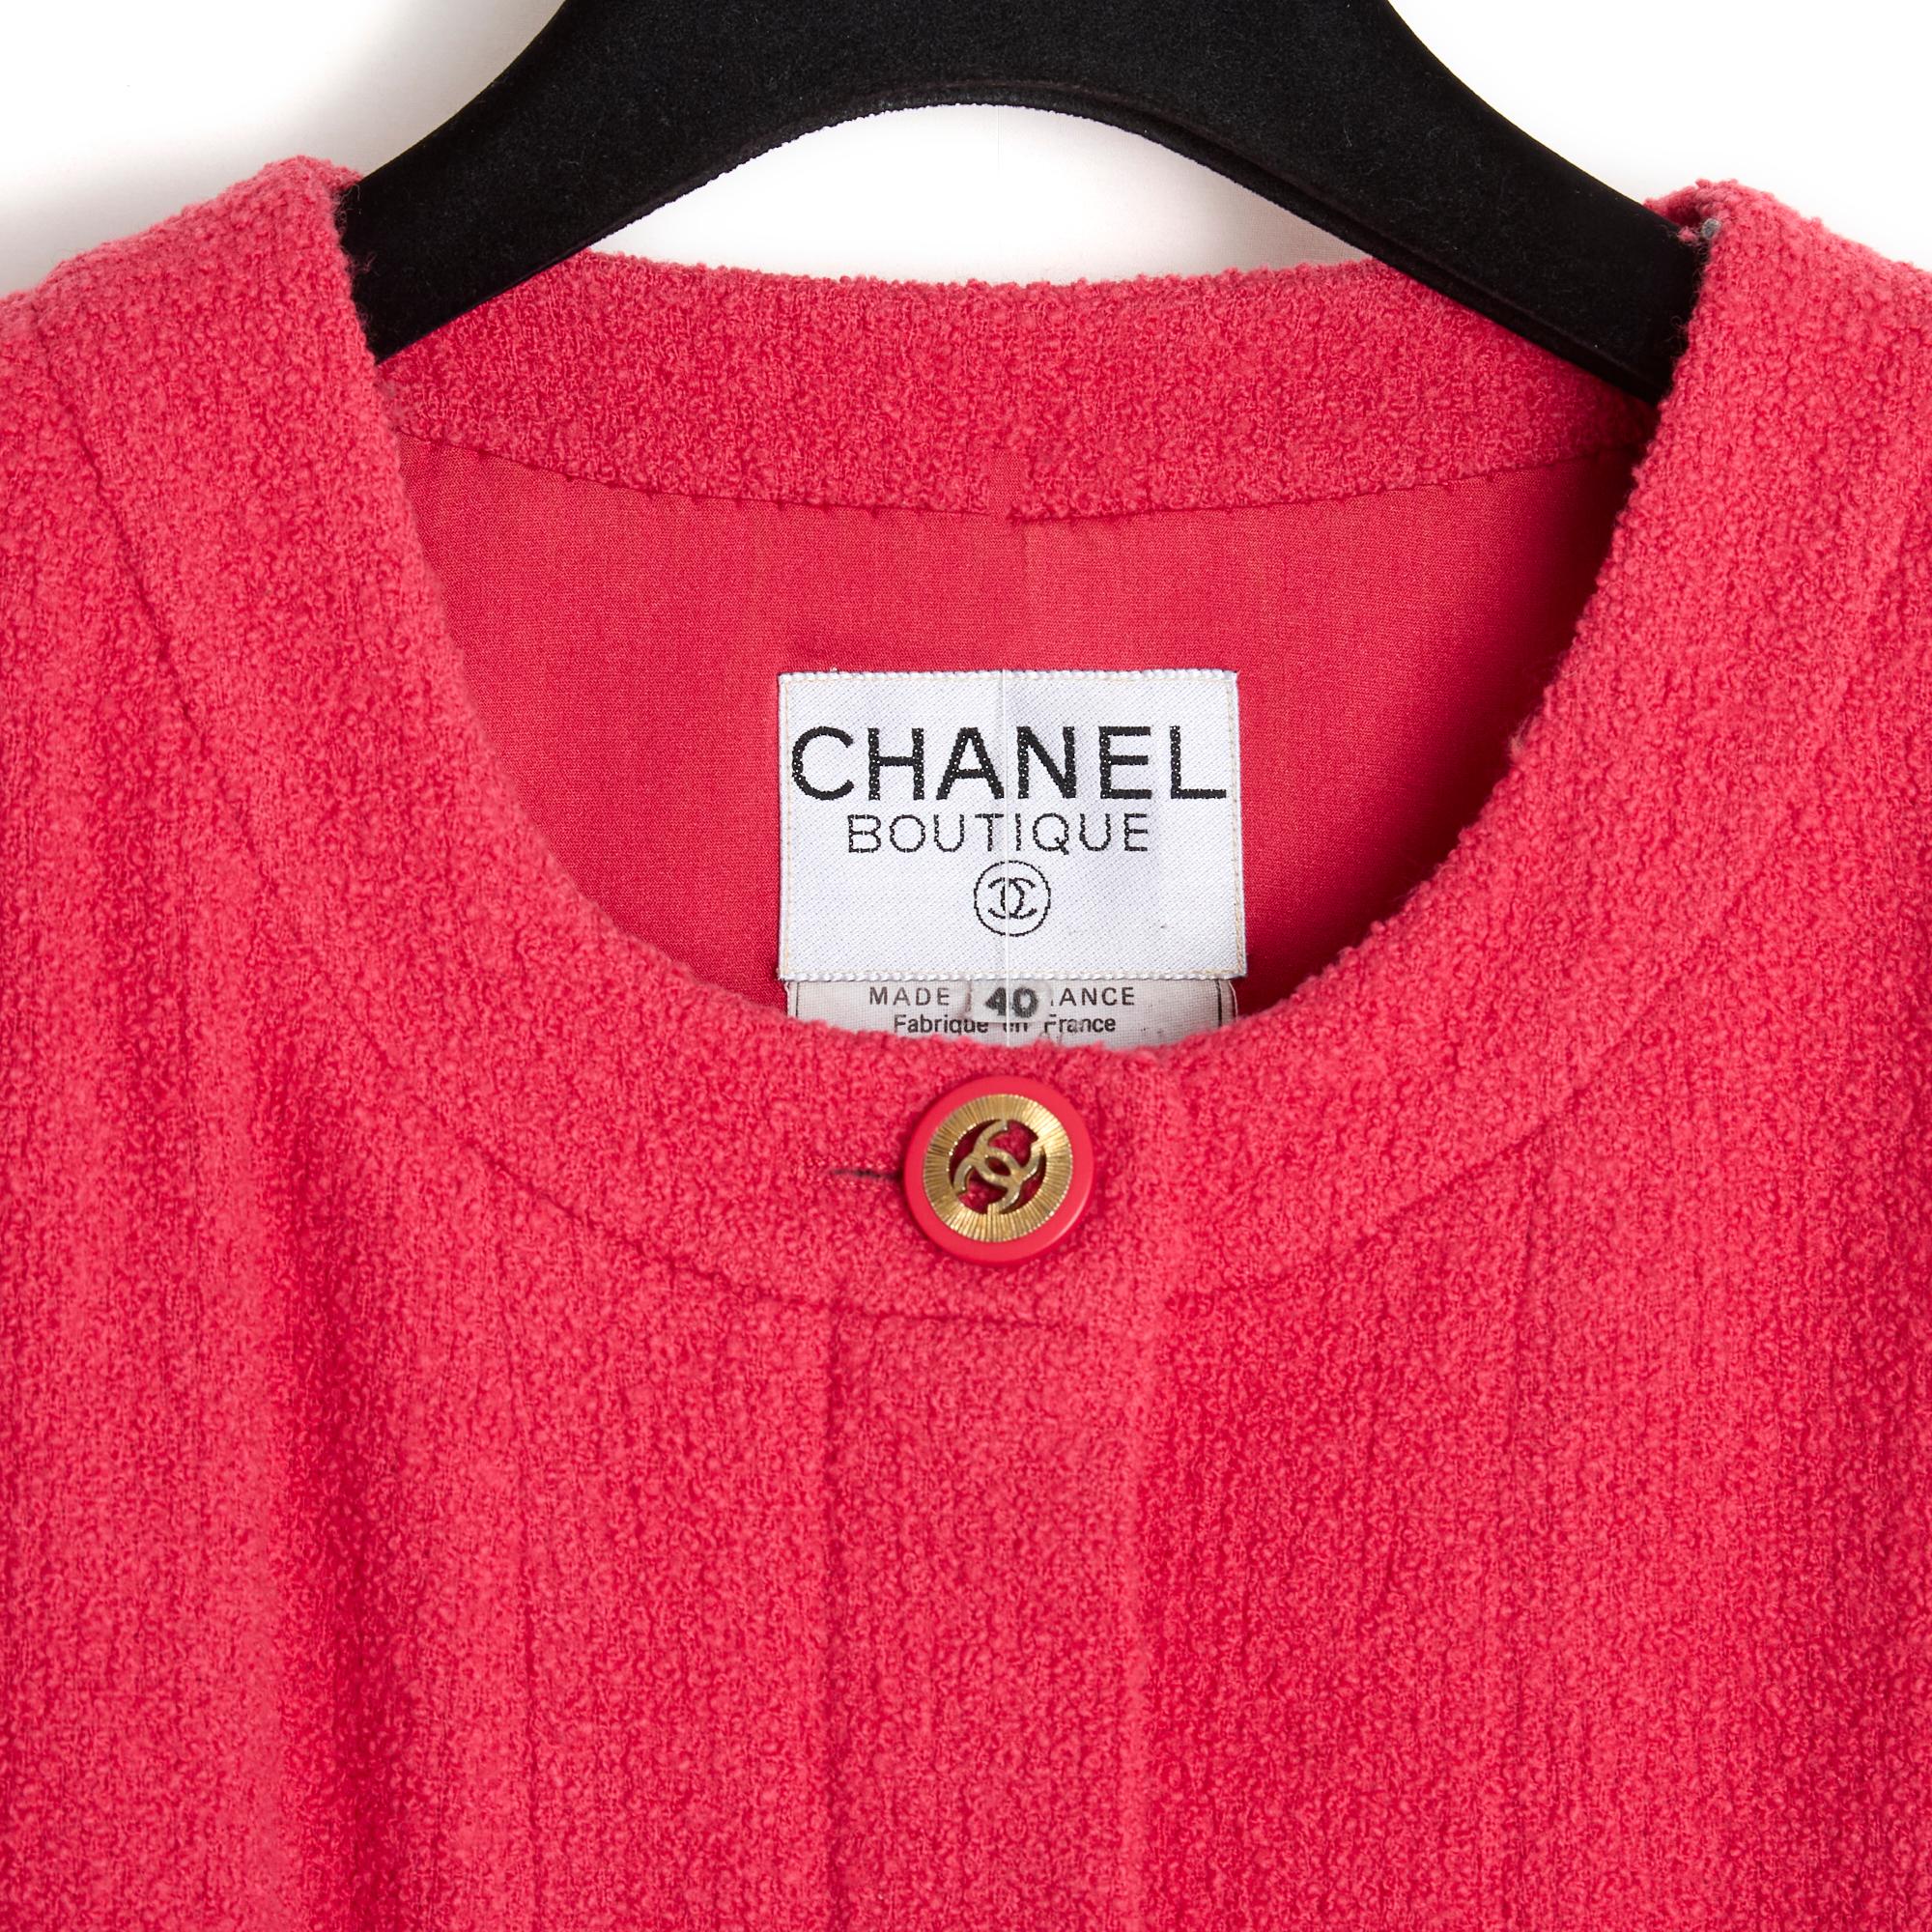 FW1991 Chanel Pink Wool Jacket Ensemble FR40 US8 For Sale 1